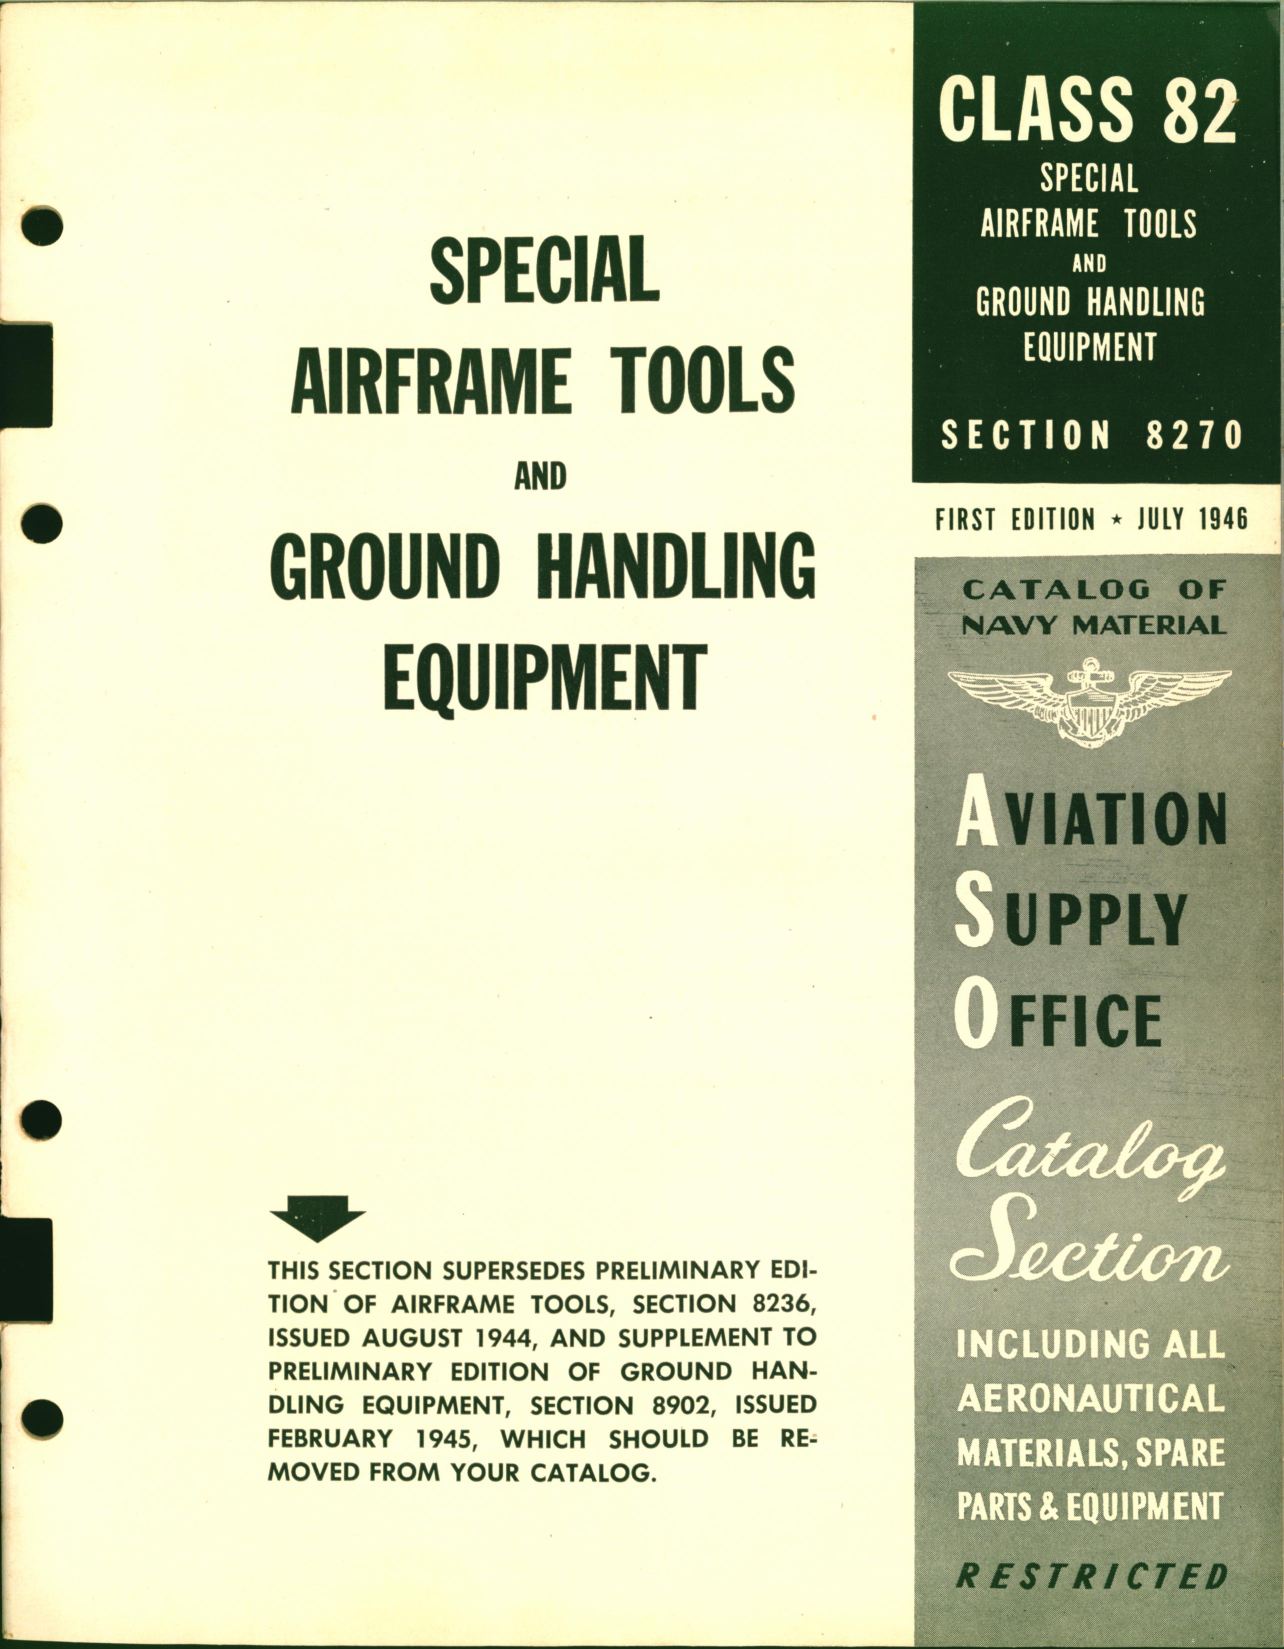 Sample page 1 from AirCorps Library document: Special Airframe tools and Ground Handling Equipment